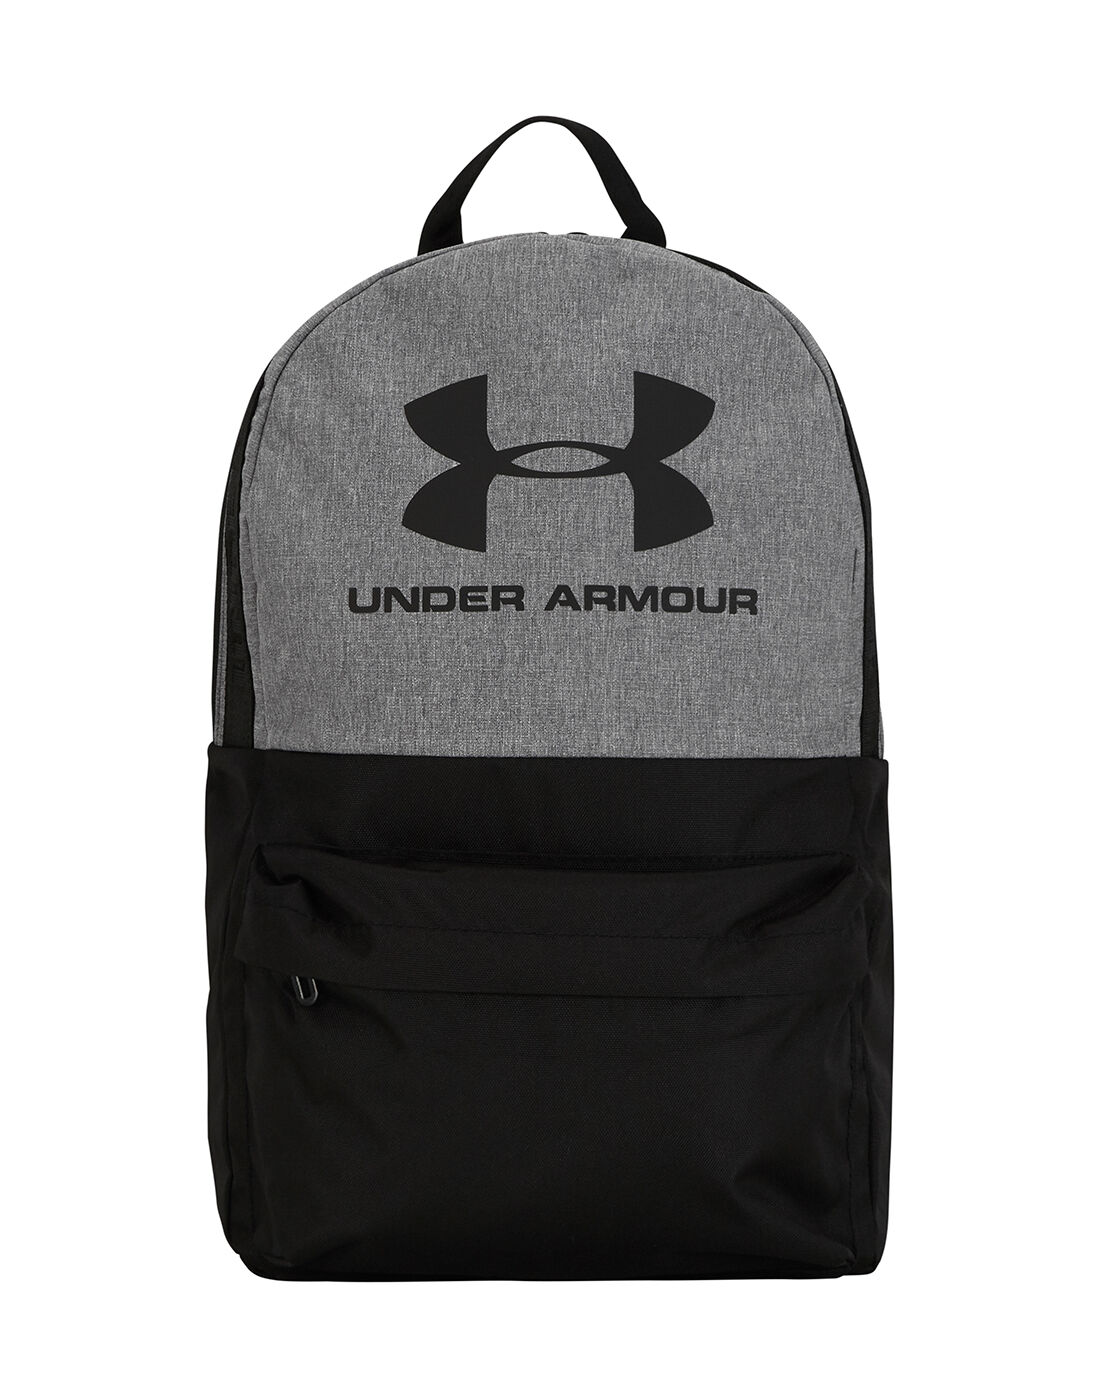 under armour string bag price Sale,up 